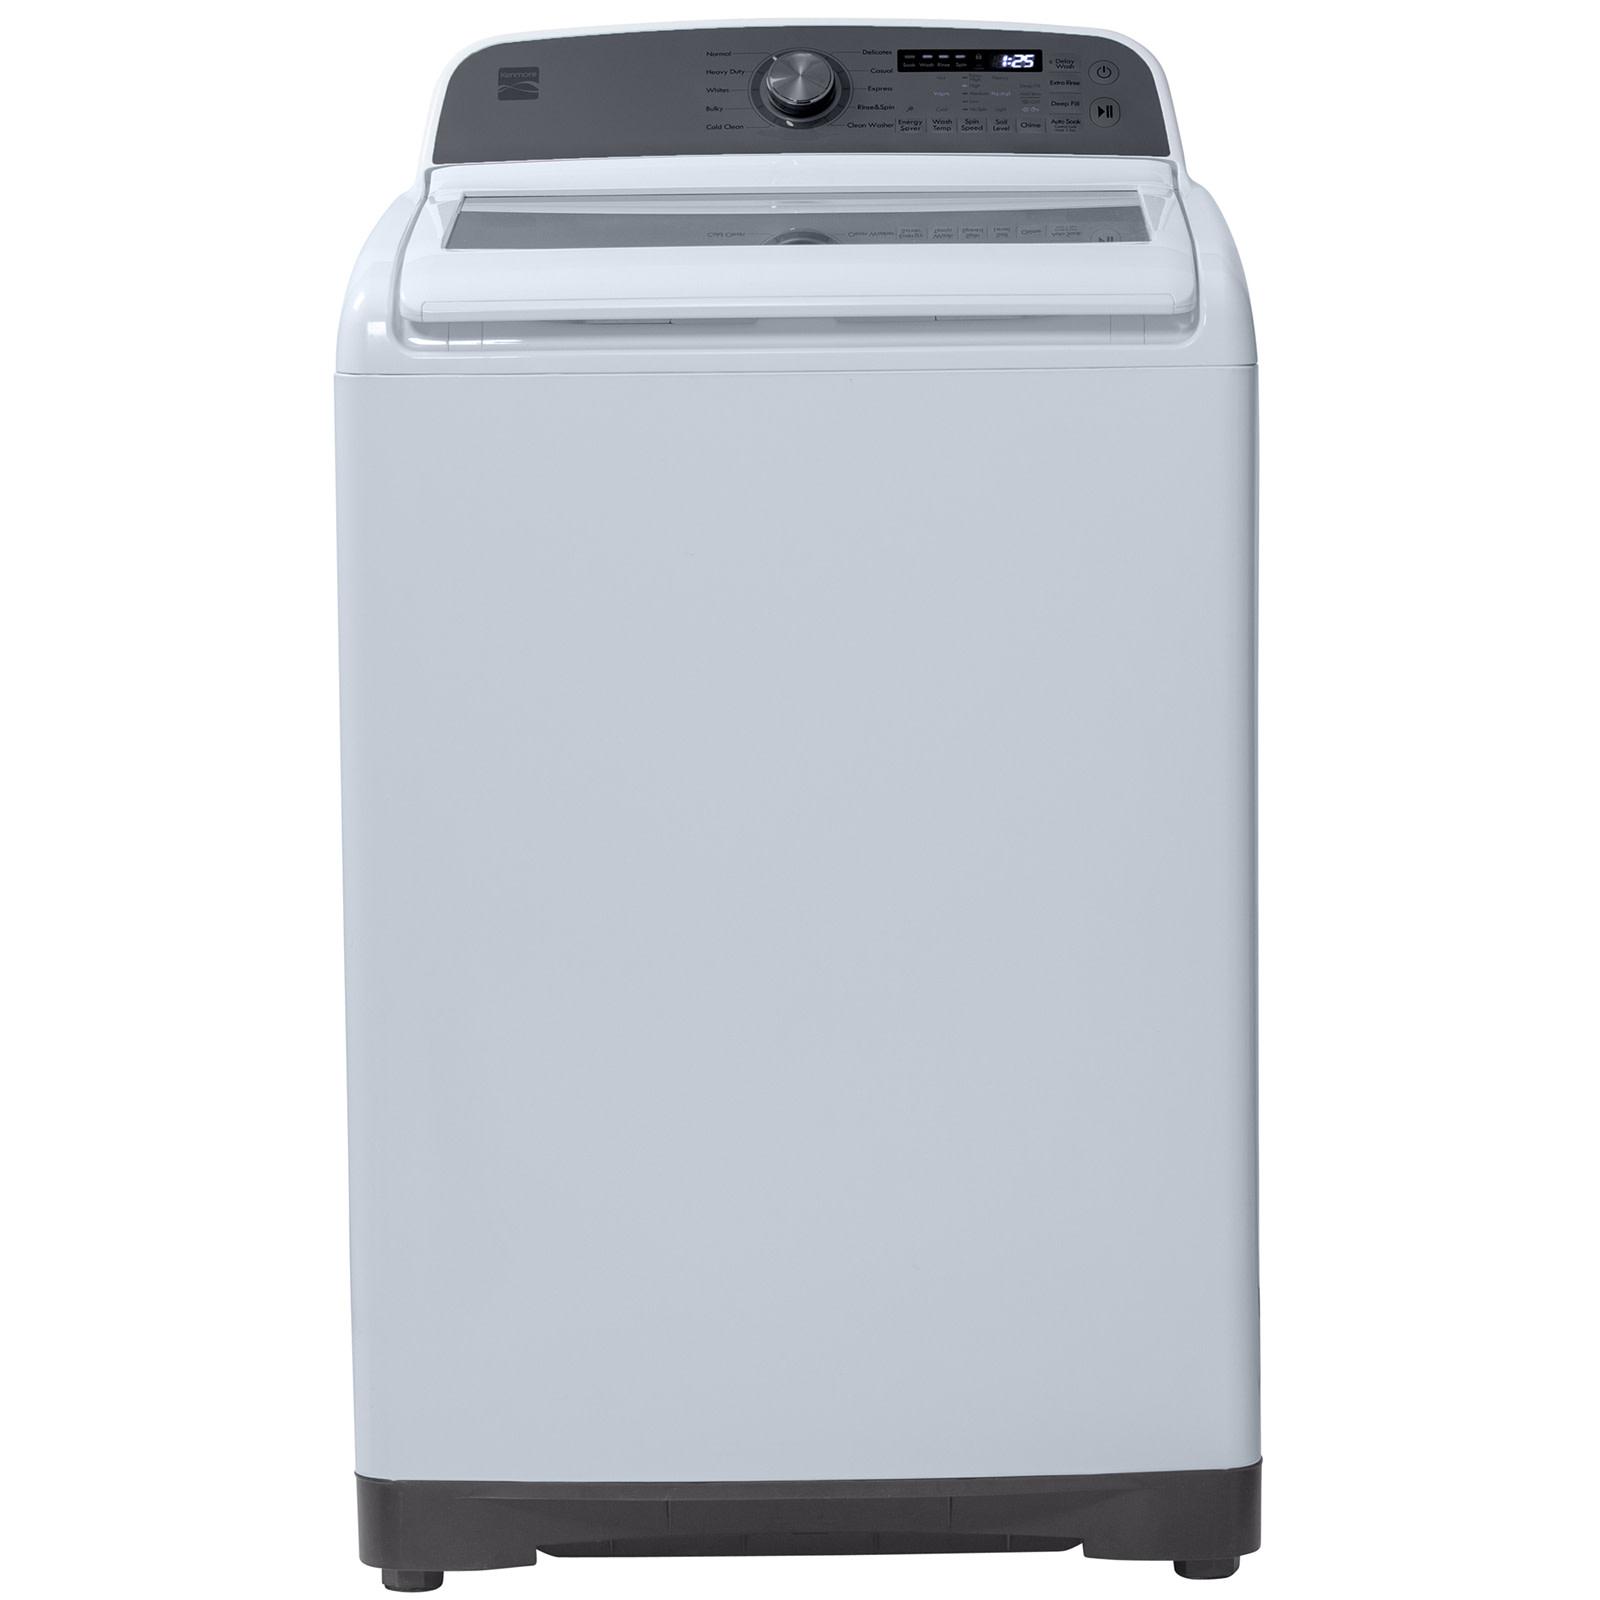 Kenmore 18.4 Kenmore 29142 4.5 cu. ft. ENERGY STAR HE Top Load Washer w/ Triple Action Impeller in White